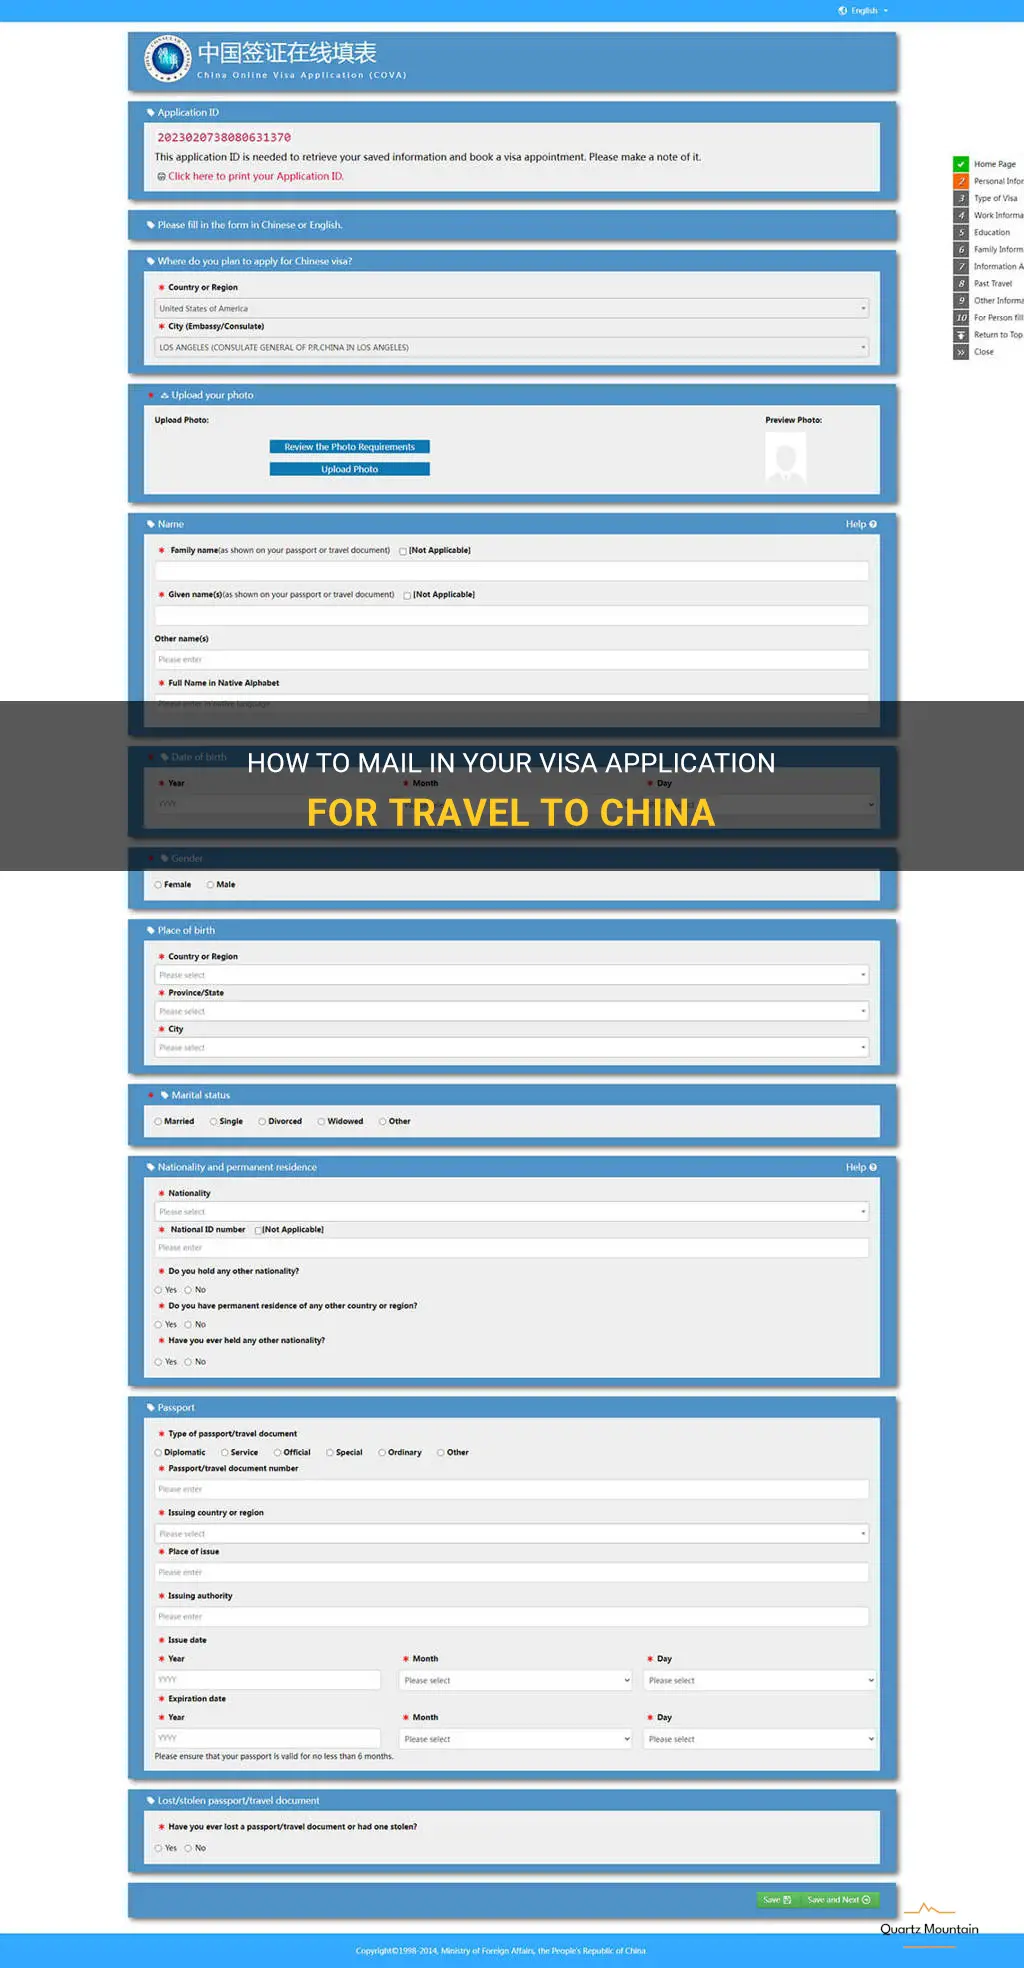 can you mail in a visa for travel to china